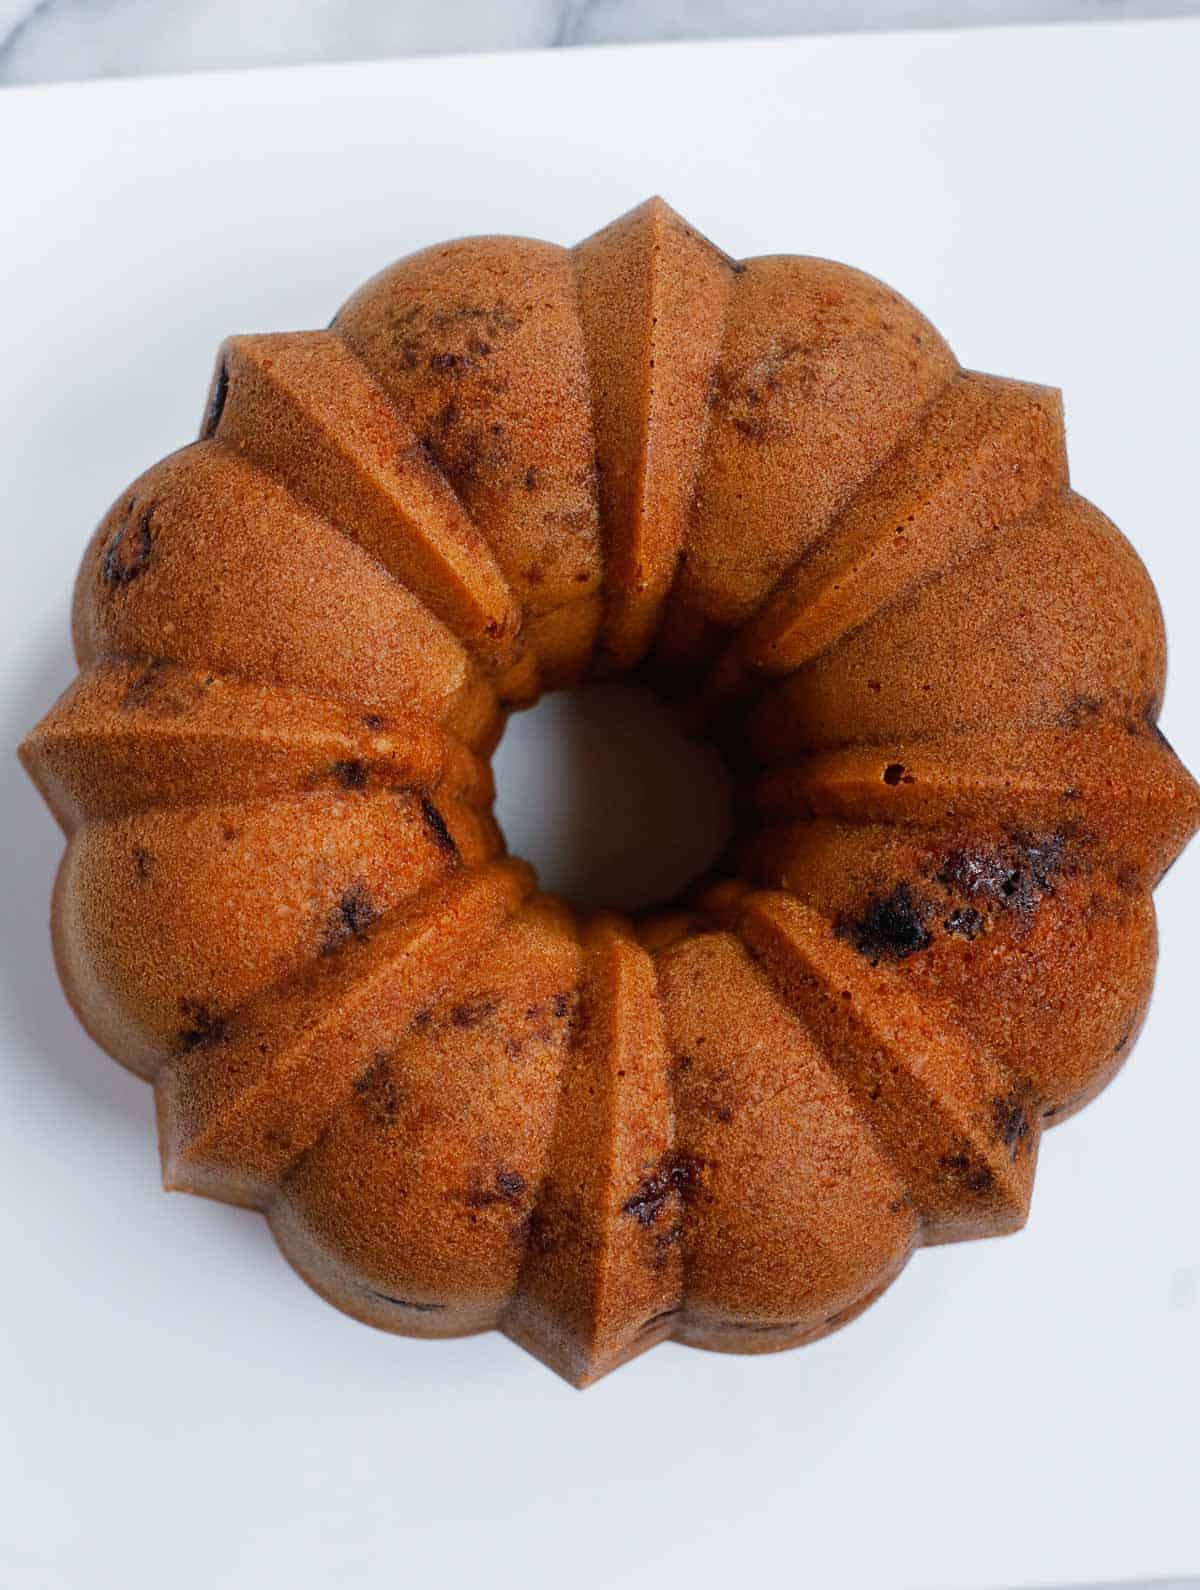 blueberry bundt cake after baking, removed from the pan.